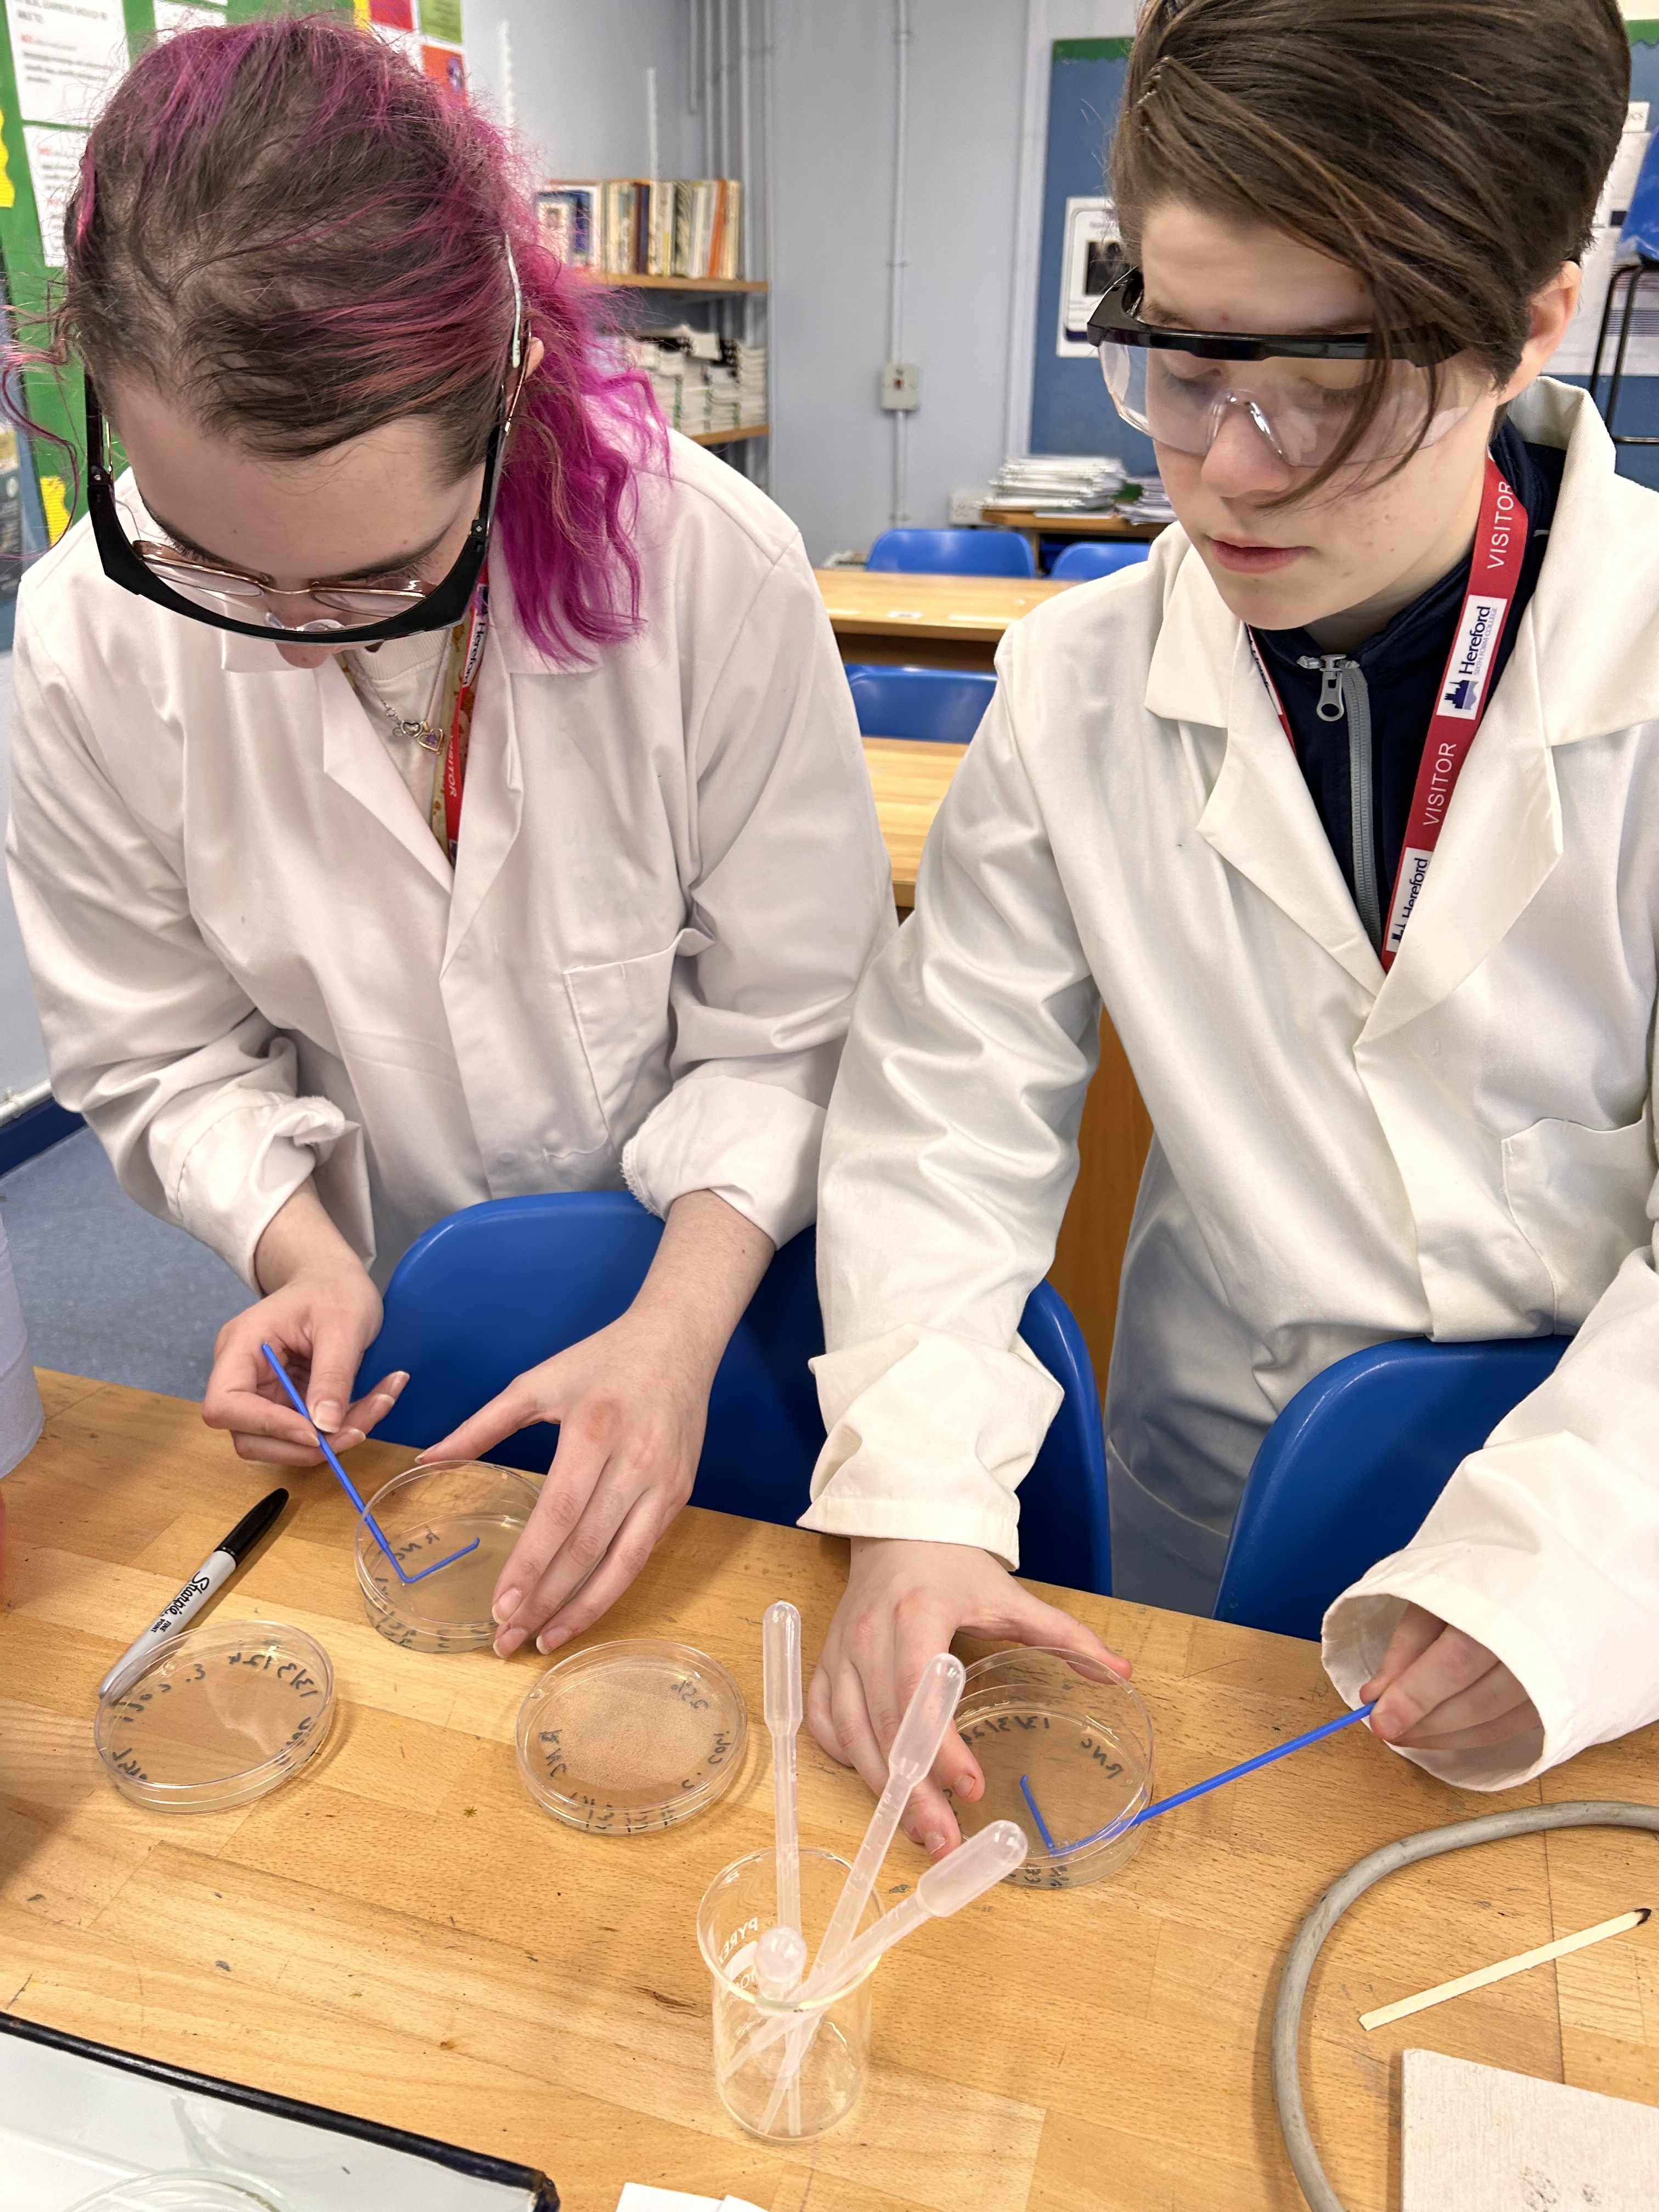 two students wearing protective goggles and lab coats working with Petri dishes in the laboratory